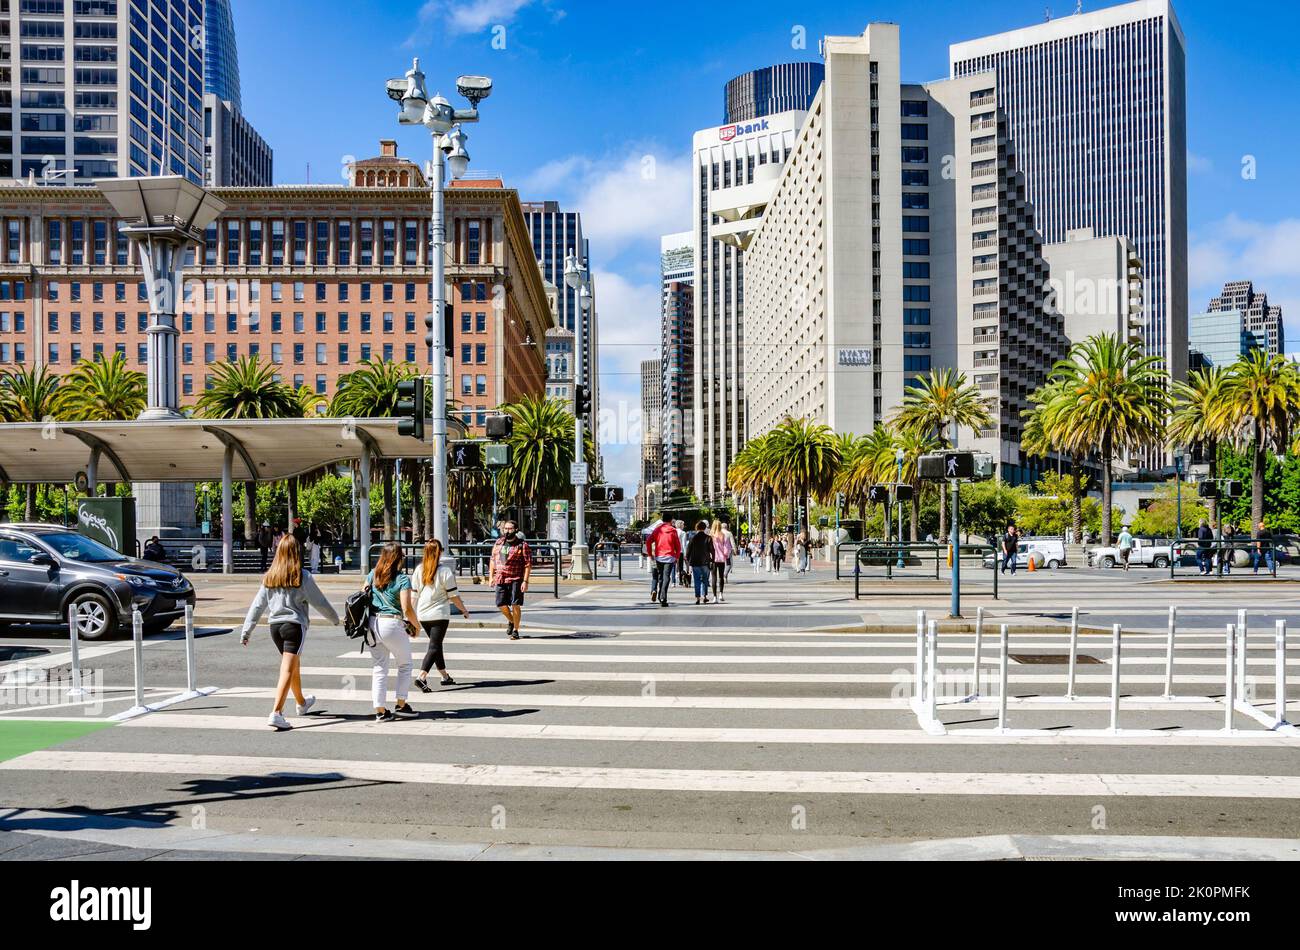 Pedestrian crossing busy with people crossing Embarcadero in San Francisco, California Stock Photo